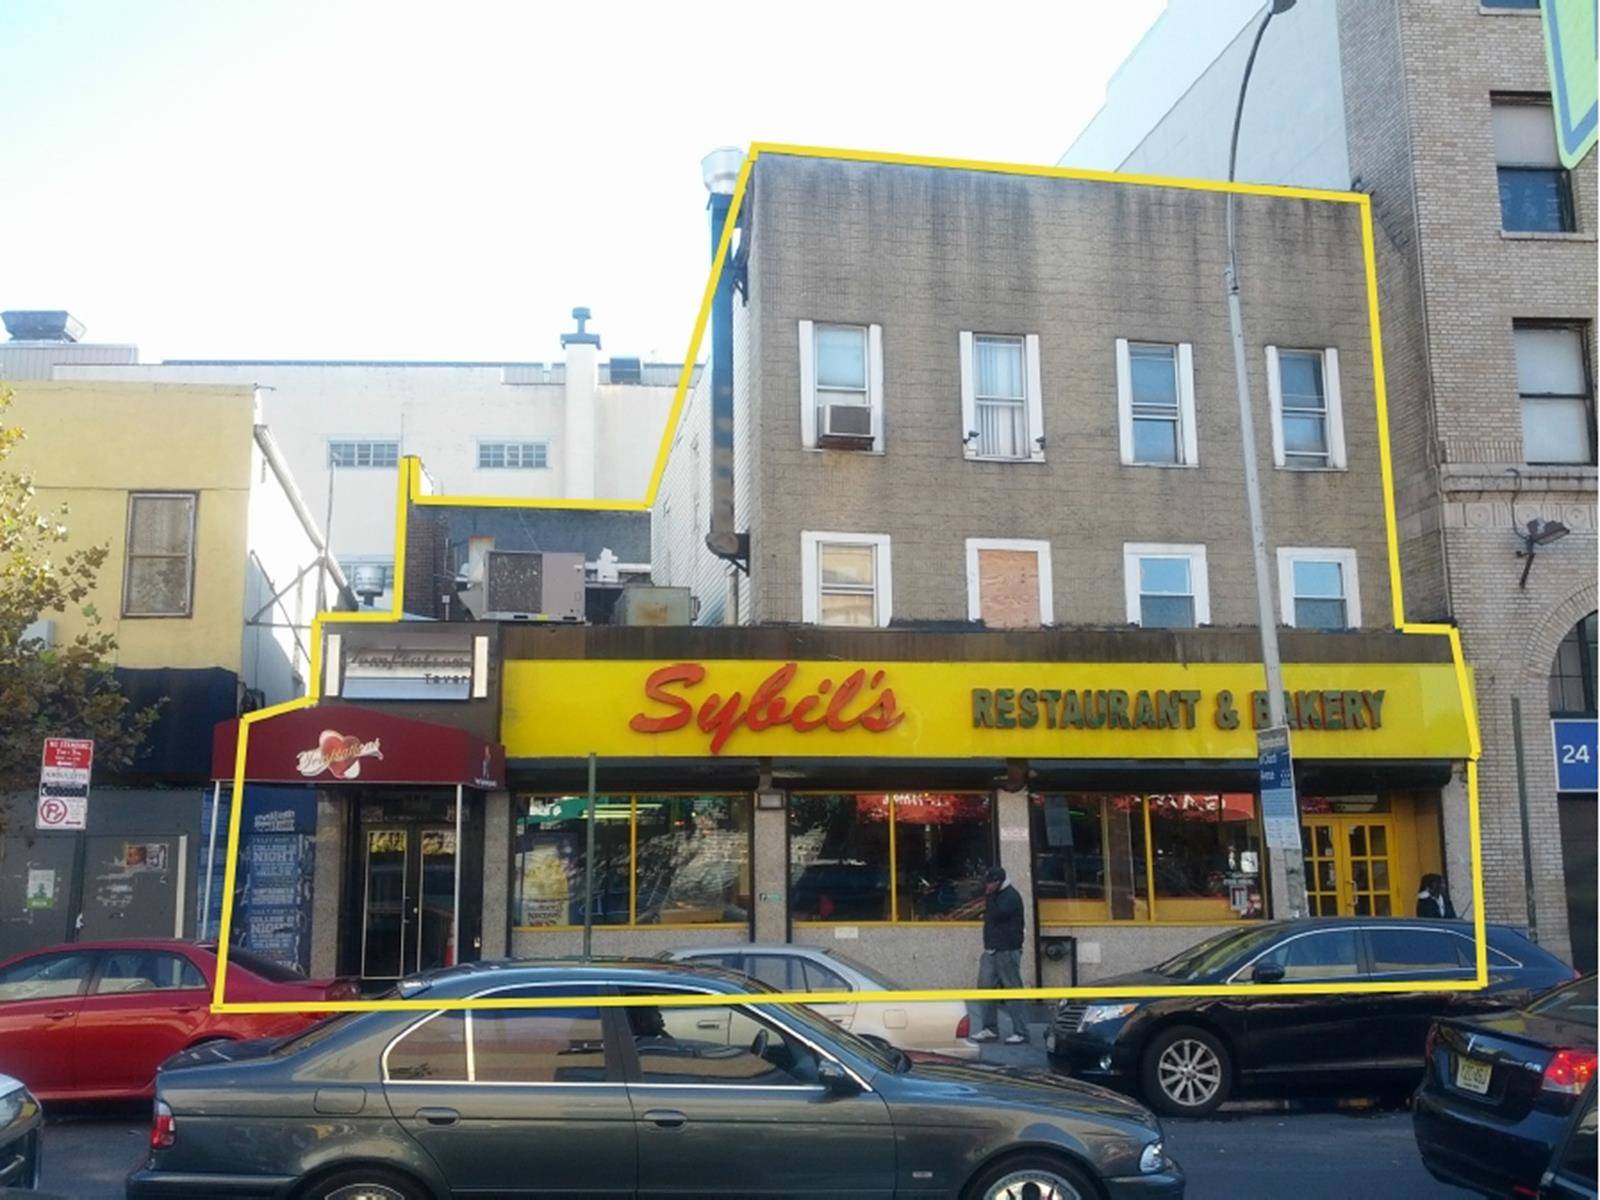 Available for sale is 2210 Church Avenue located in one of the most prime retail corridors of renown Flatbush Brooklyn.